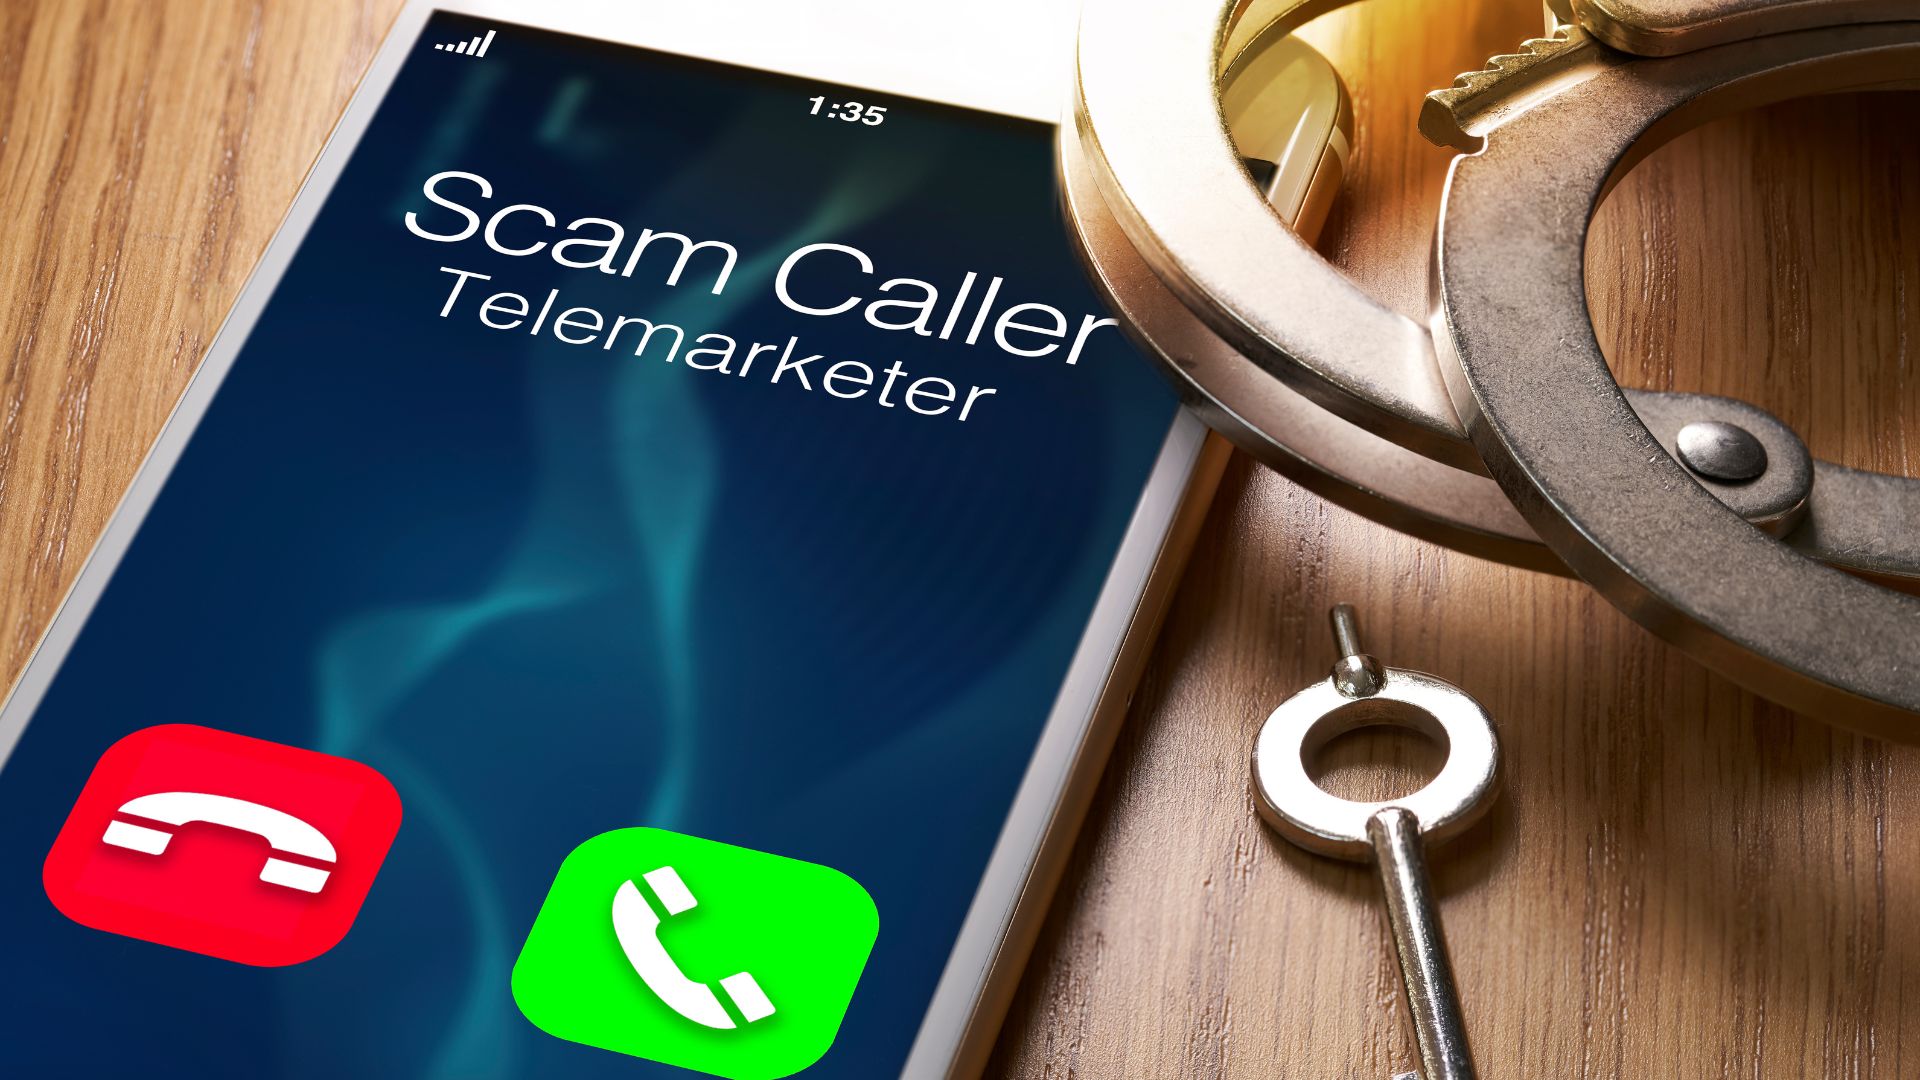 iphone with "Scam Caller Telemarketer" on it.  Handcuffs and key are off to the right of the iphhone.